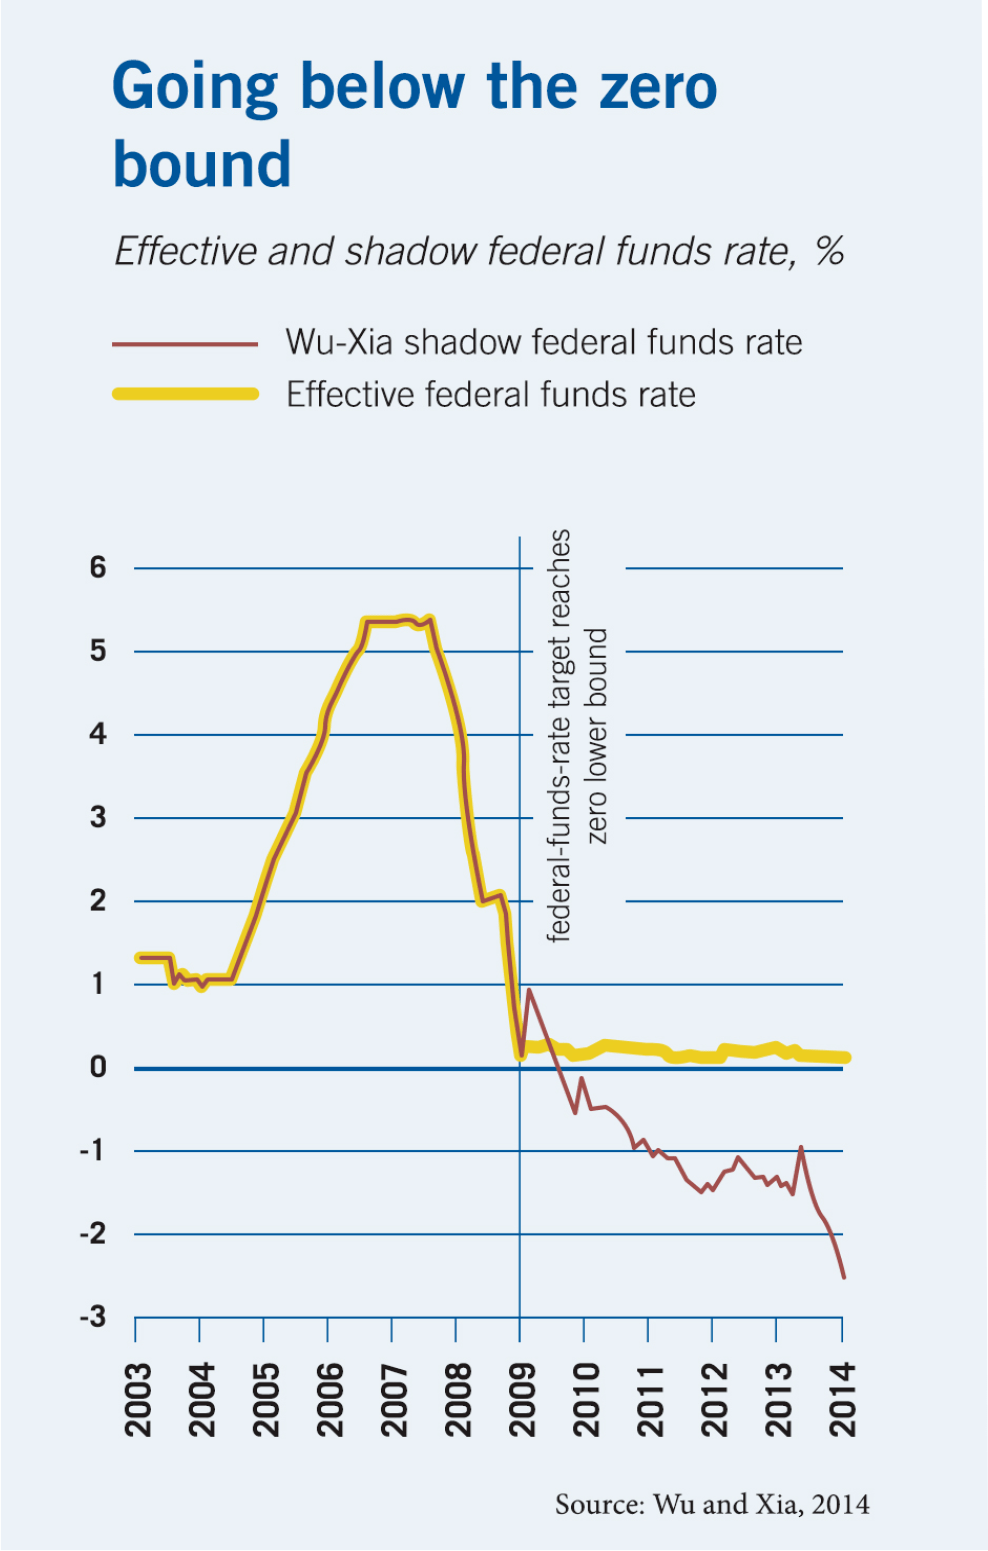 A line chart plotting both the effective federal funds target rate and the researchers’ shadow rate, with percentages on the y-axis and the years of 2003 to 2014 on the x-axis. The lines follow the same path until 2009, after which the effective rate stays just above zero, while the shadow rate drops below zero to negative two-point-five percent.